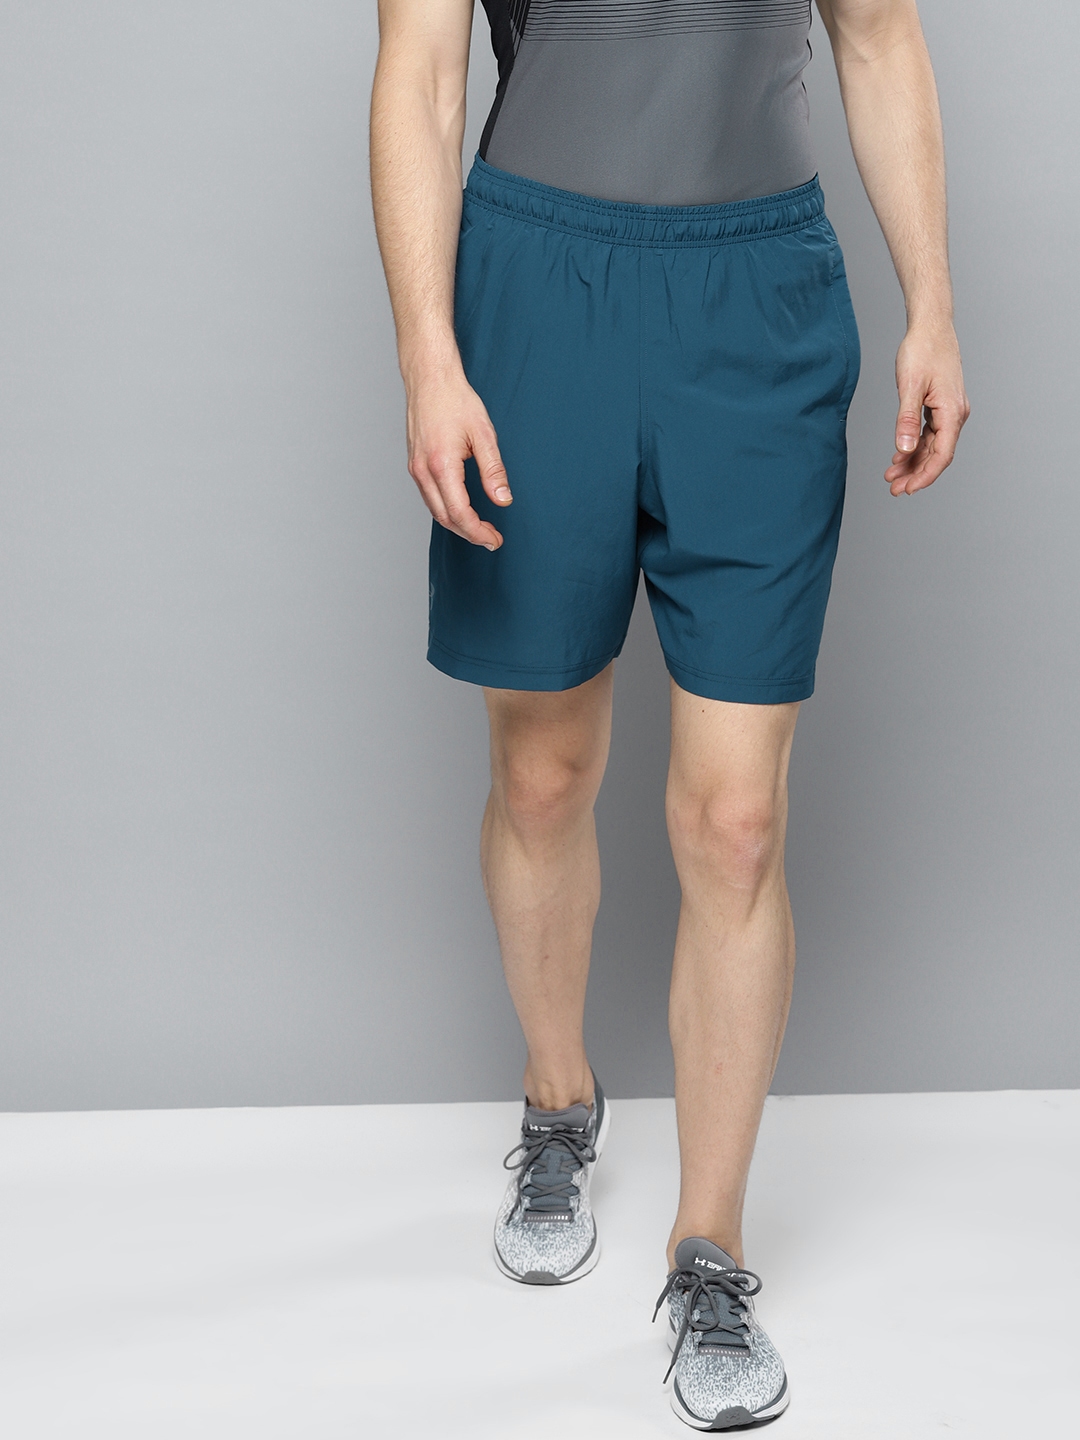 under armour teal shorts